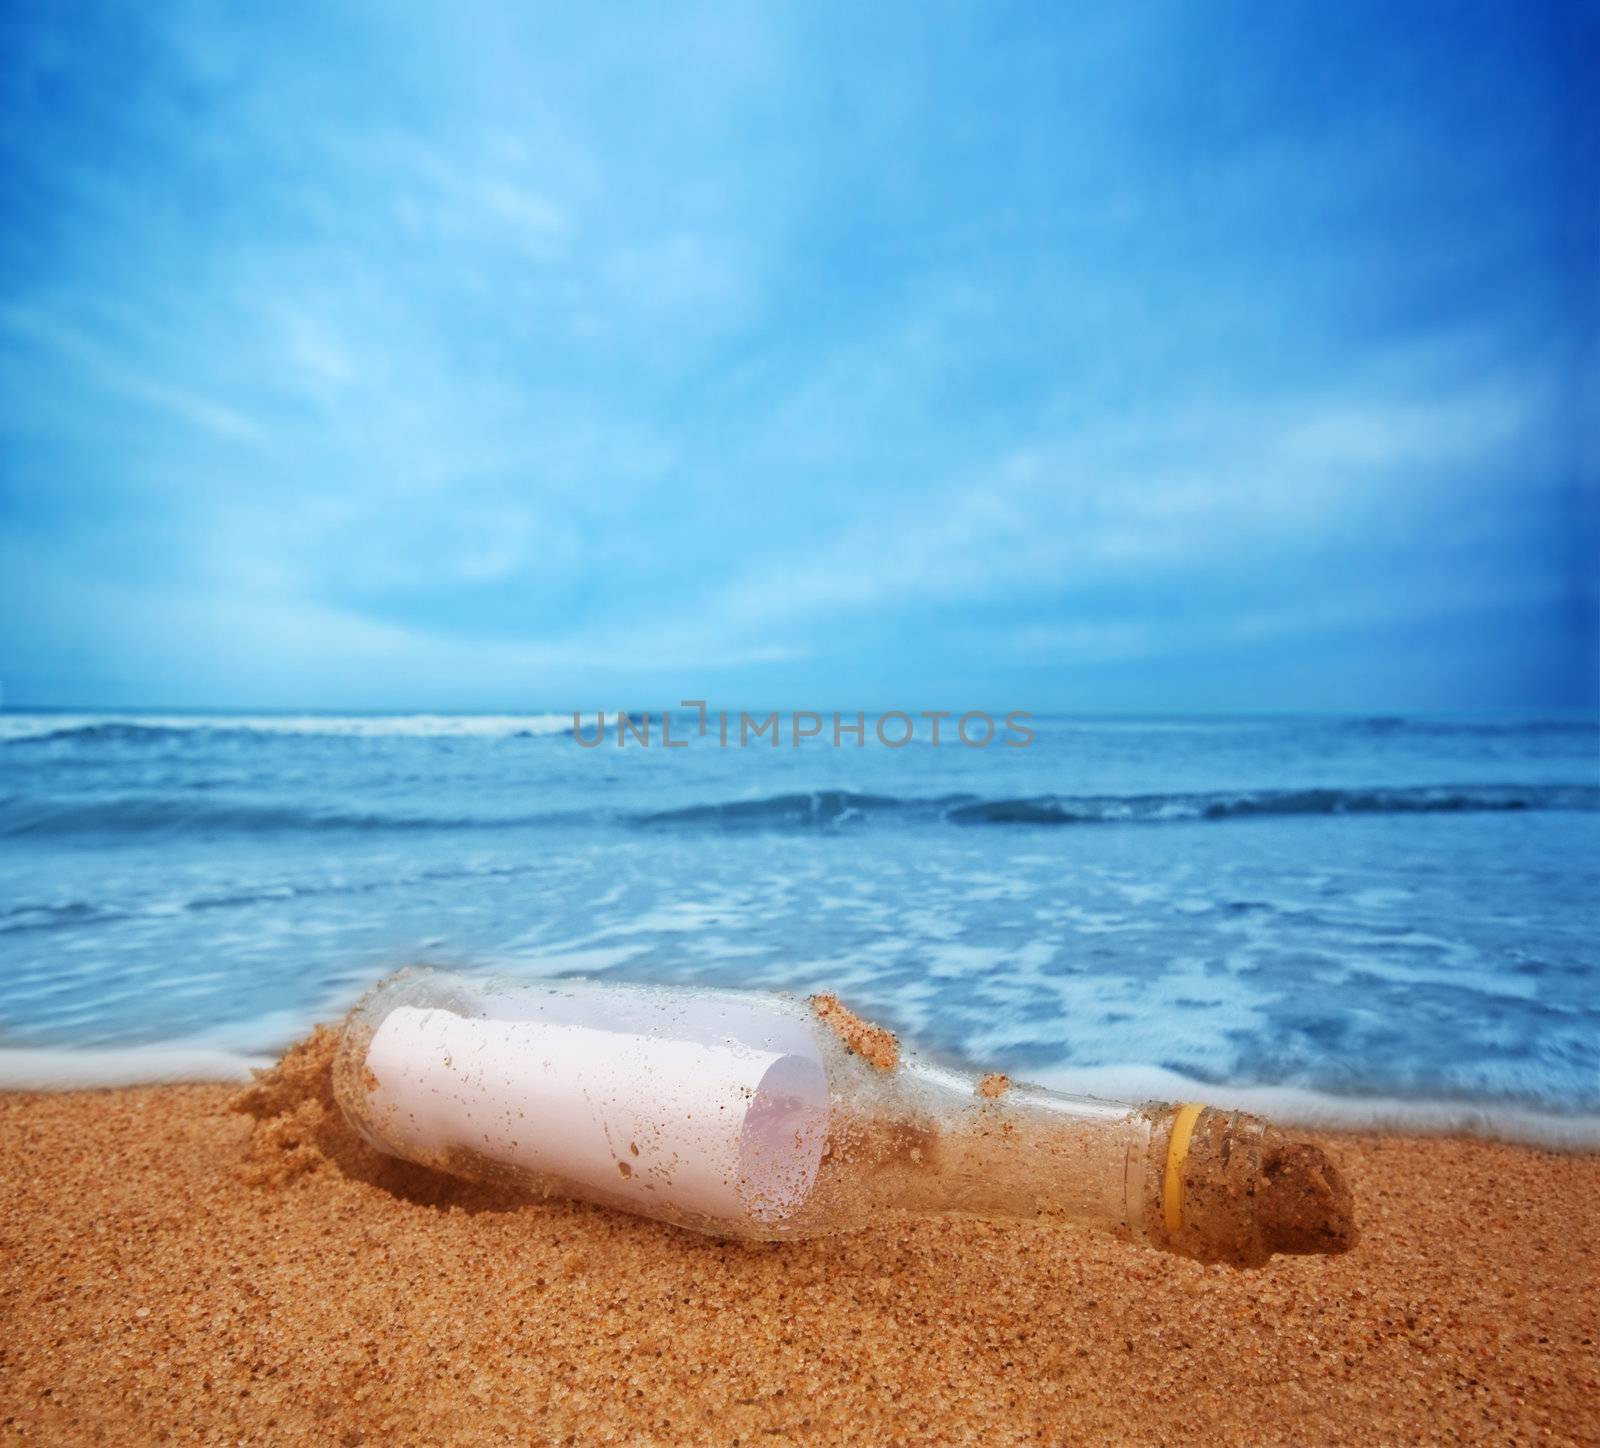 Message in the bottle by photocreo